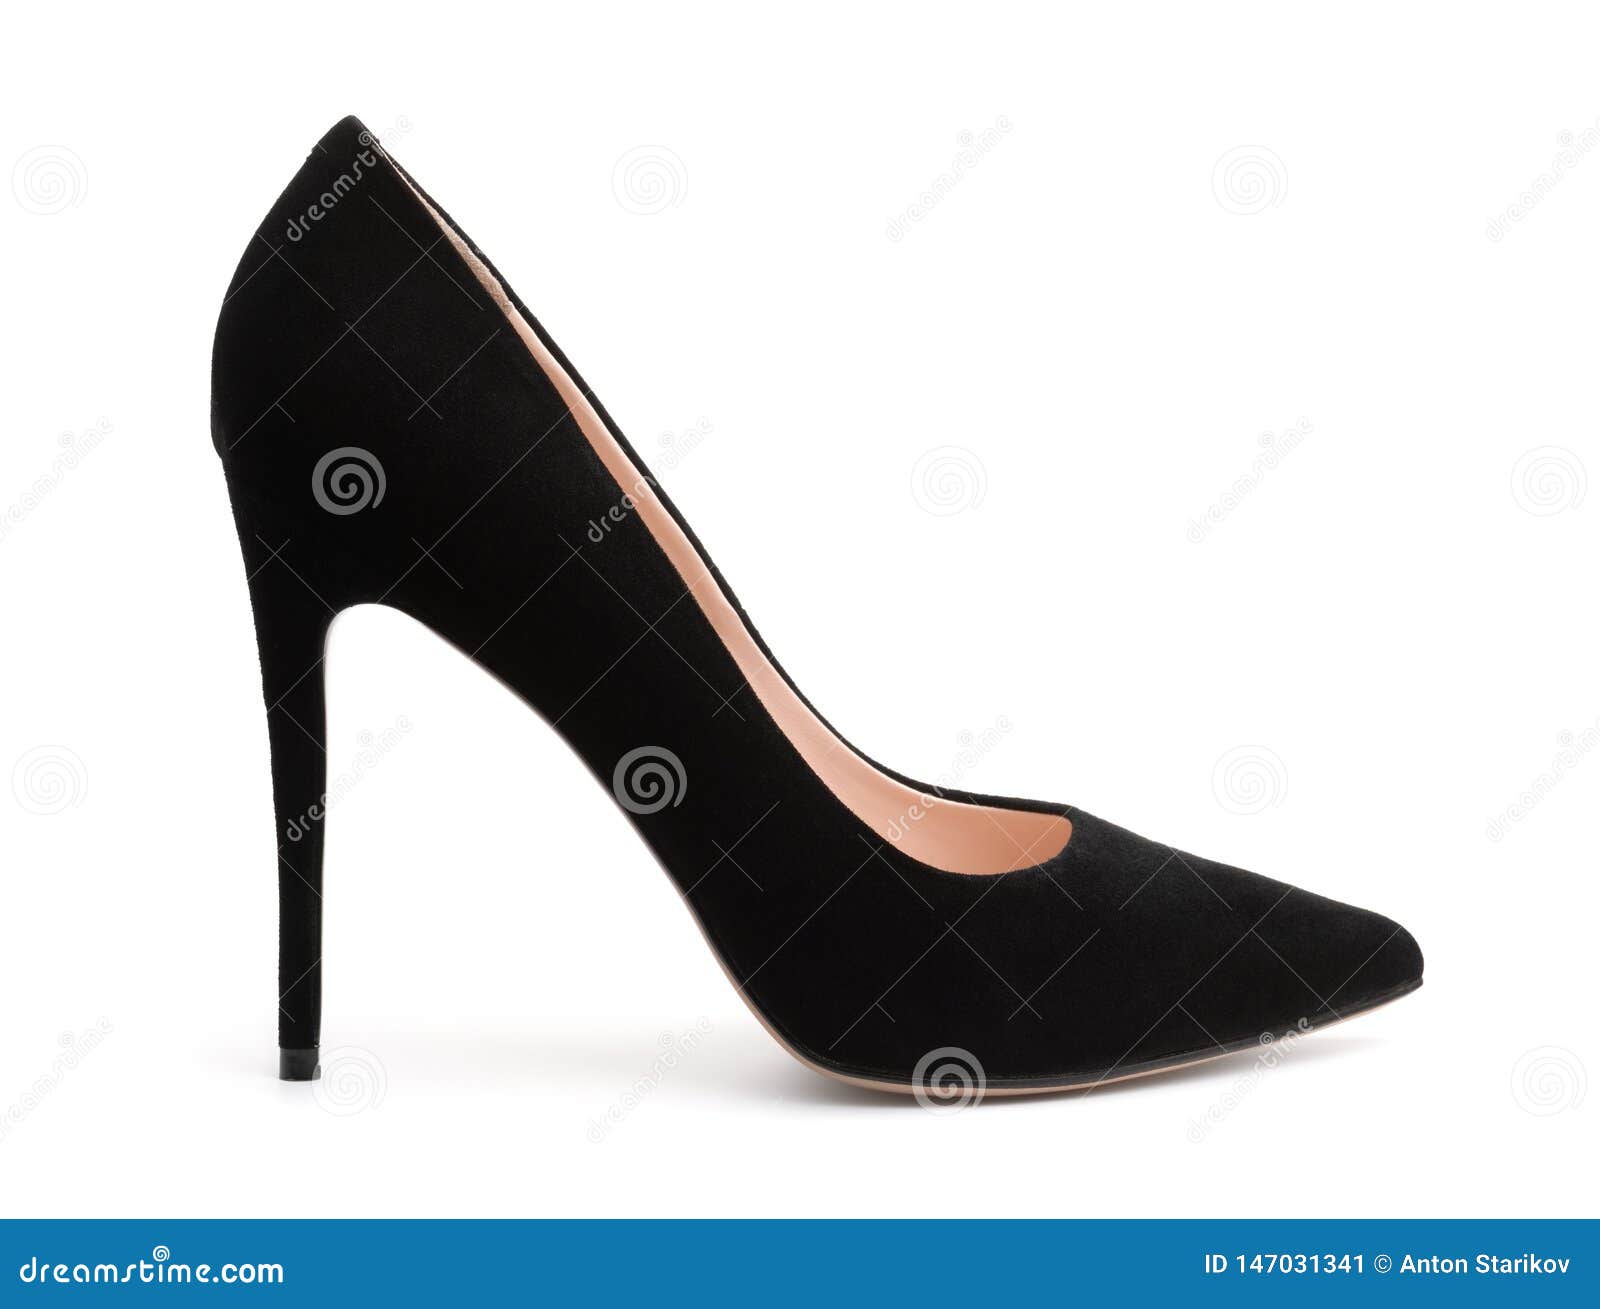 Side View of Black Suede High Heel Shoe Stock Image - Image of object ...